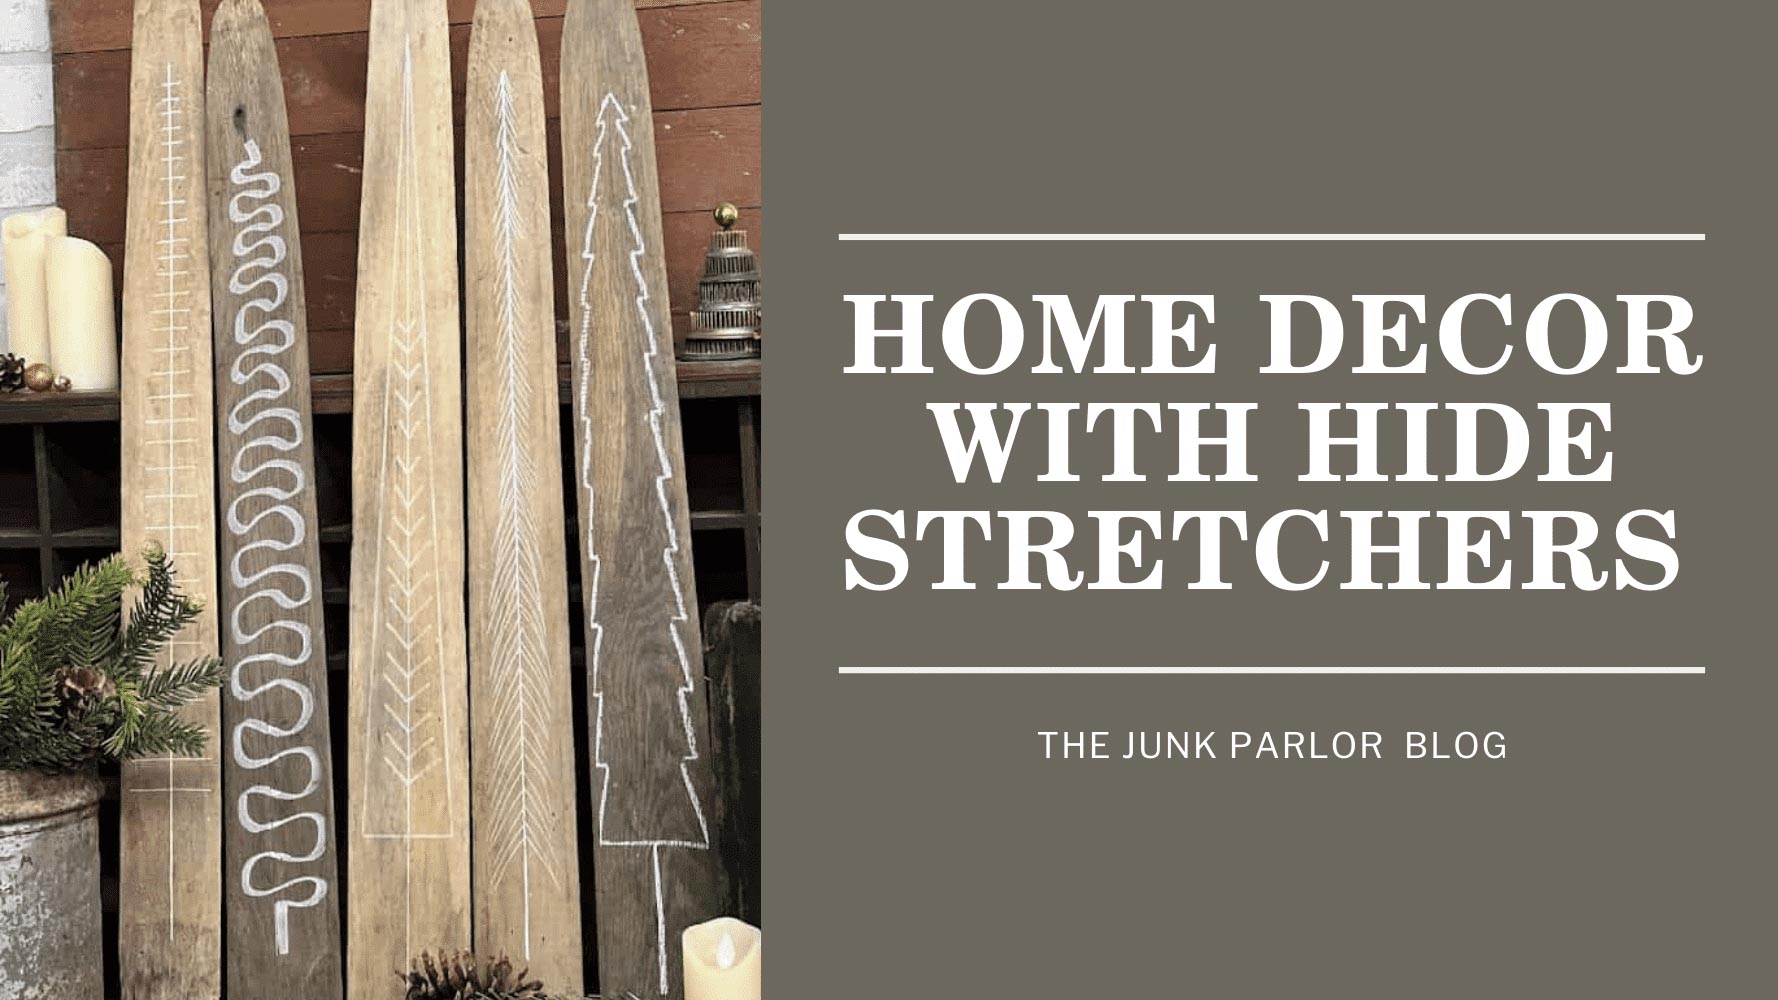 Making a Quick and Easy Christmas Decor with Hide Stretcher - The Junk Parlor Blog Header